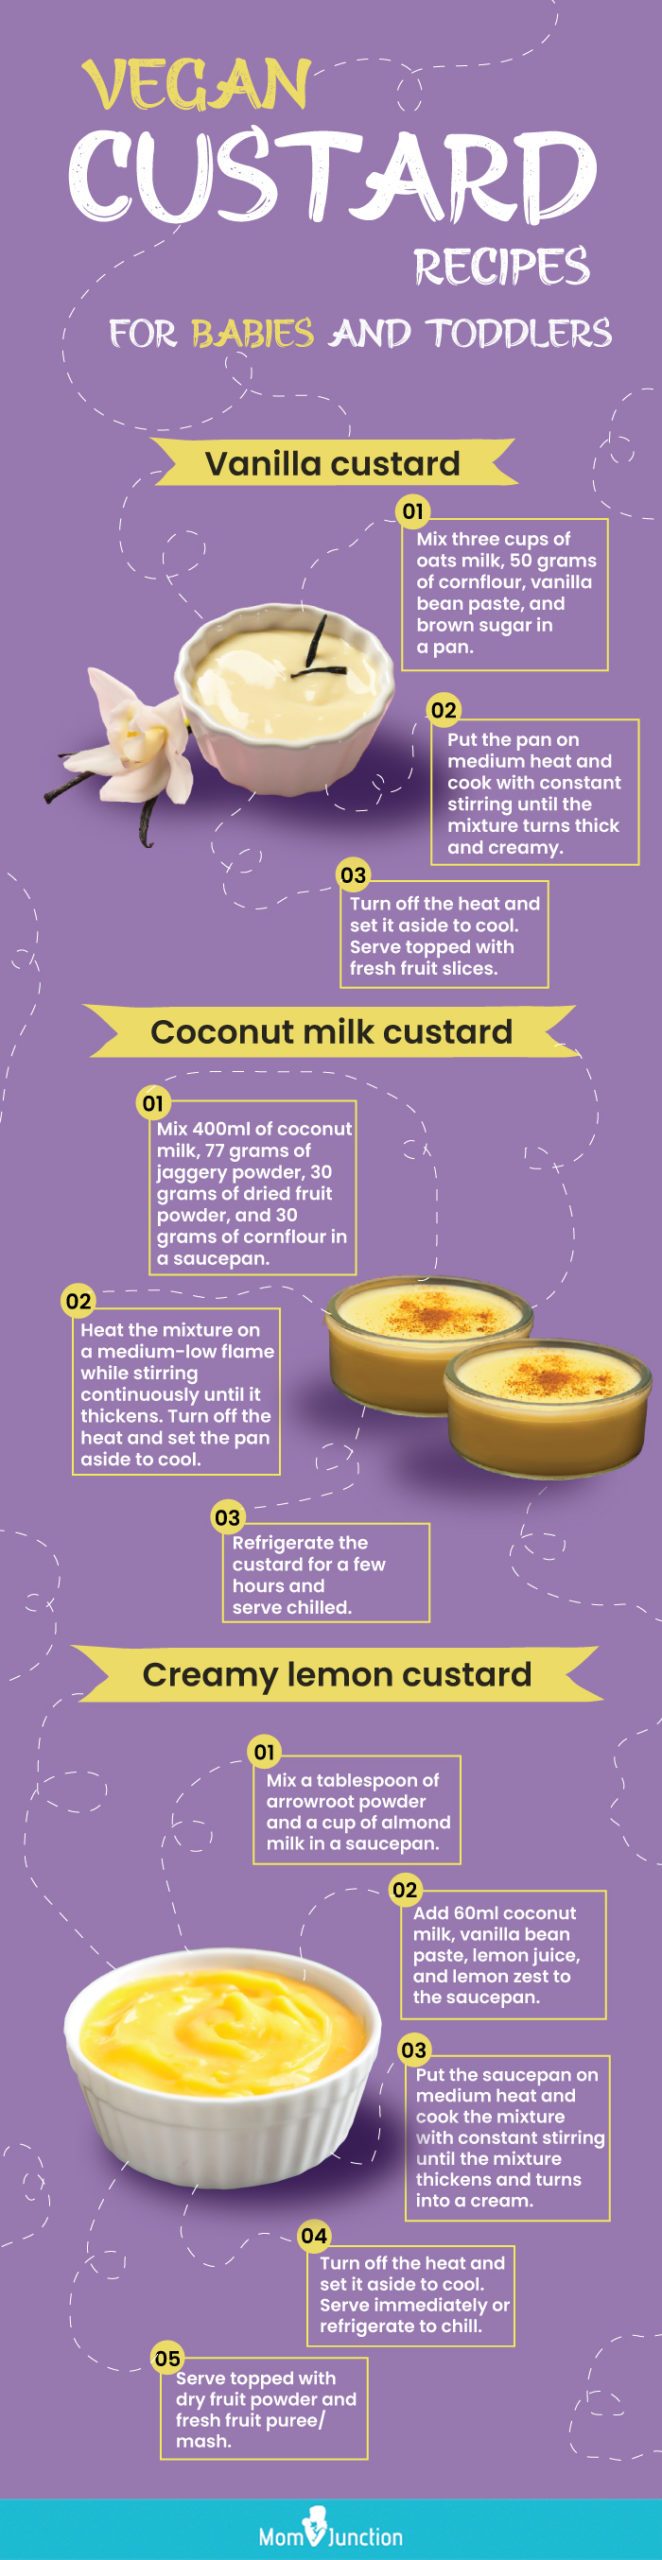 vegan custard recipes for babies and toddlers (infographic)